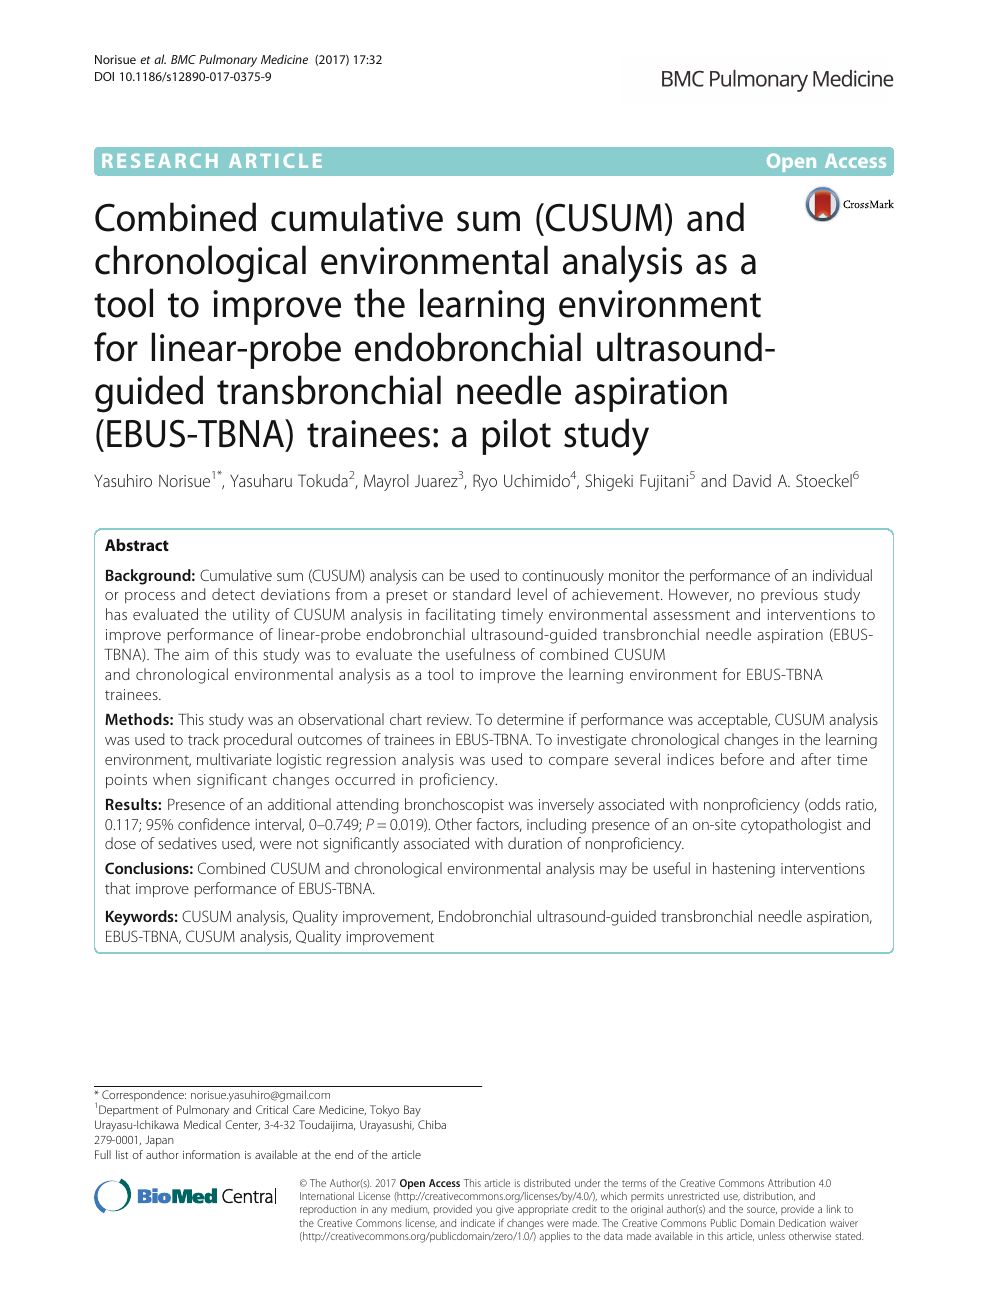 Combined Cumulative Sum Cusum And Chronological Environmental Analysis As A Tool To Improve The Learning Environment For Linear Probe Endobronchial Ultrasound Guided Transbronchial Needle Aspiration Ebus Tbna Trainees A Pilot Study Topic Of Research